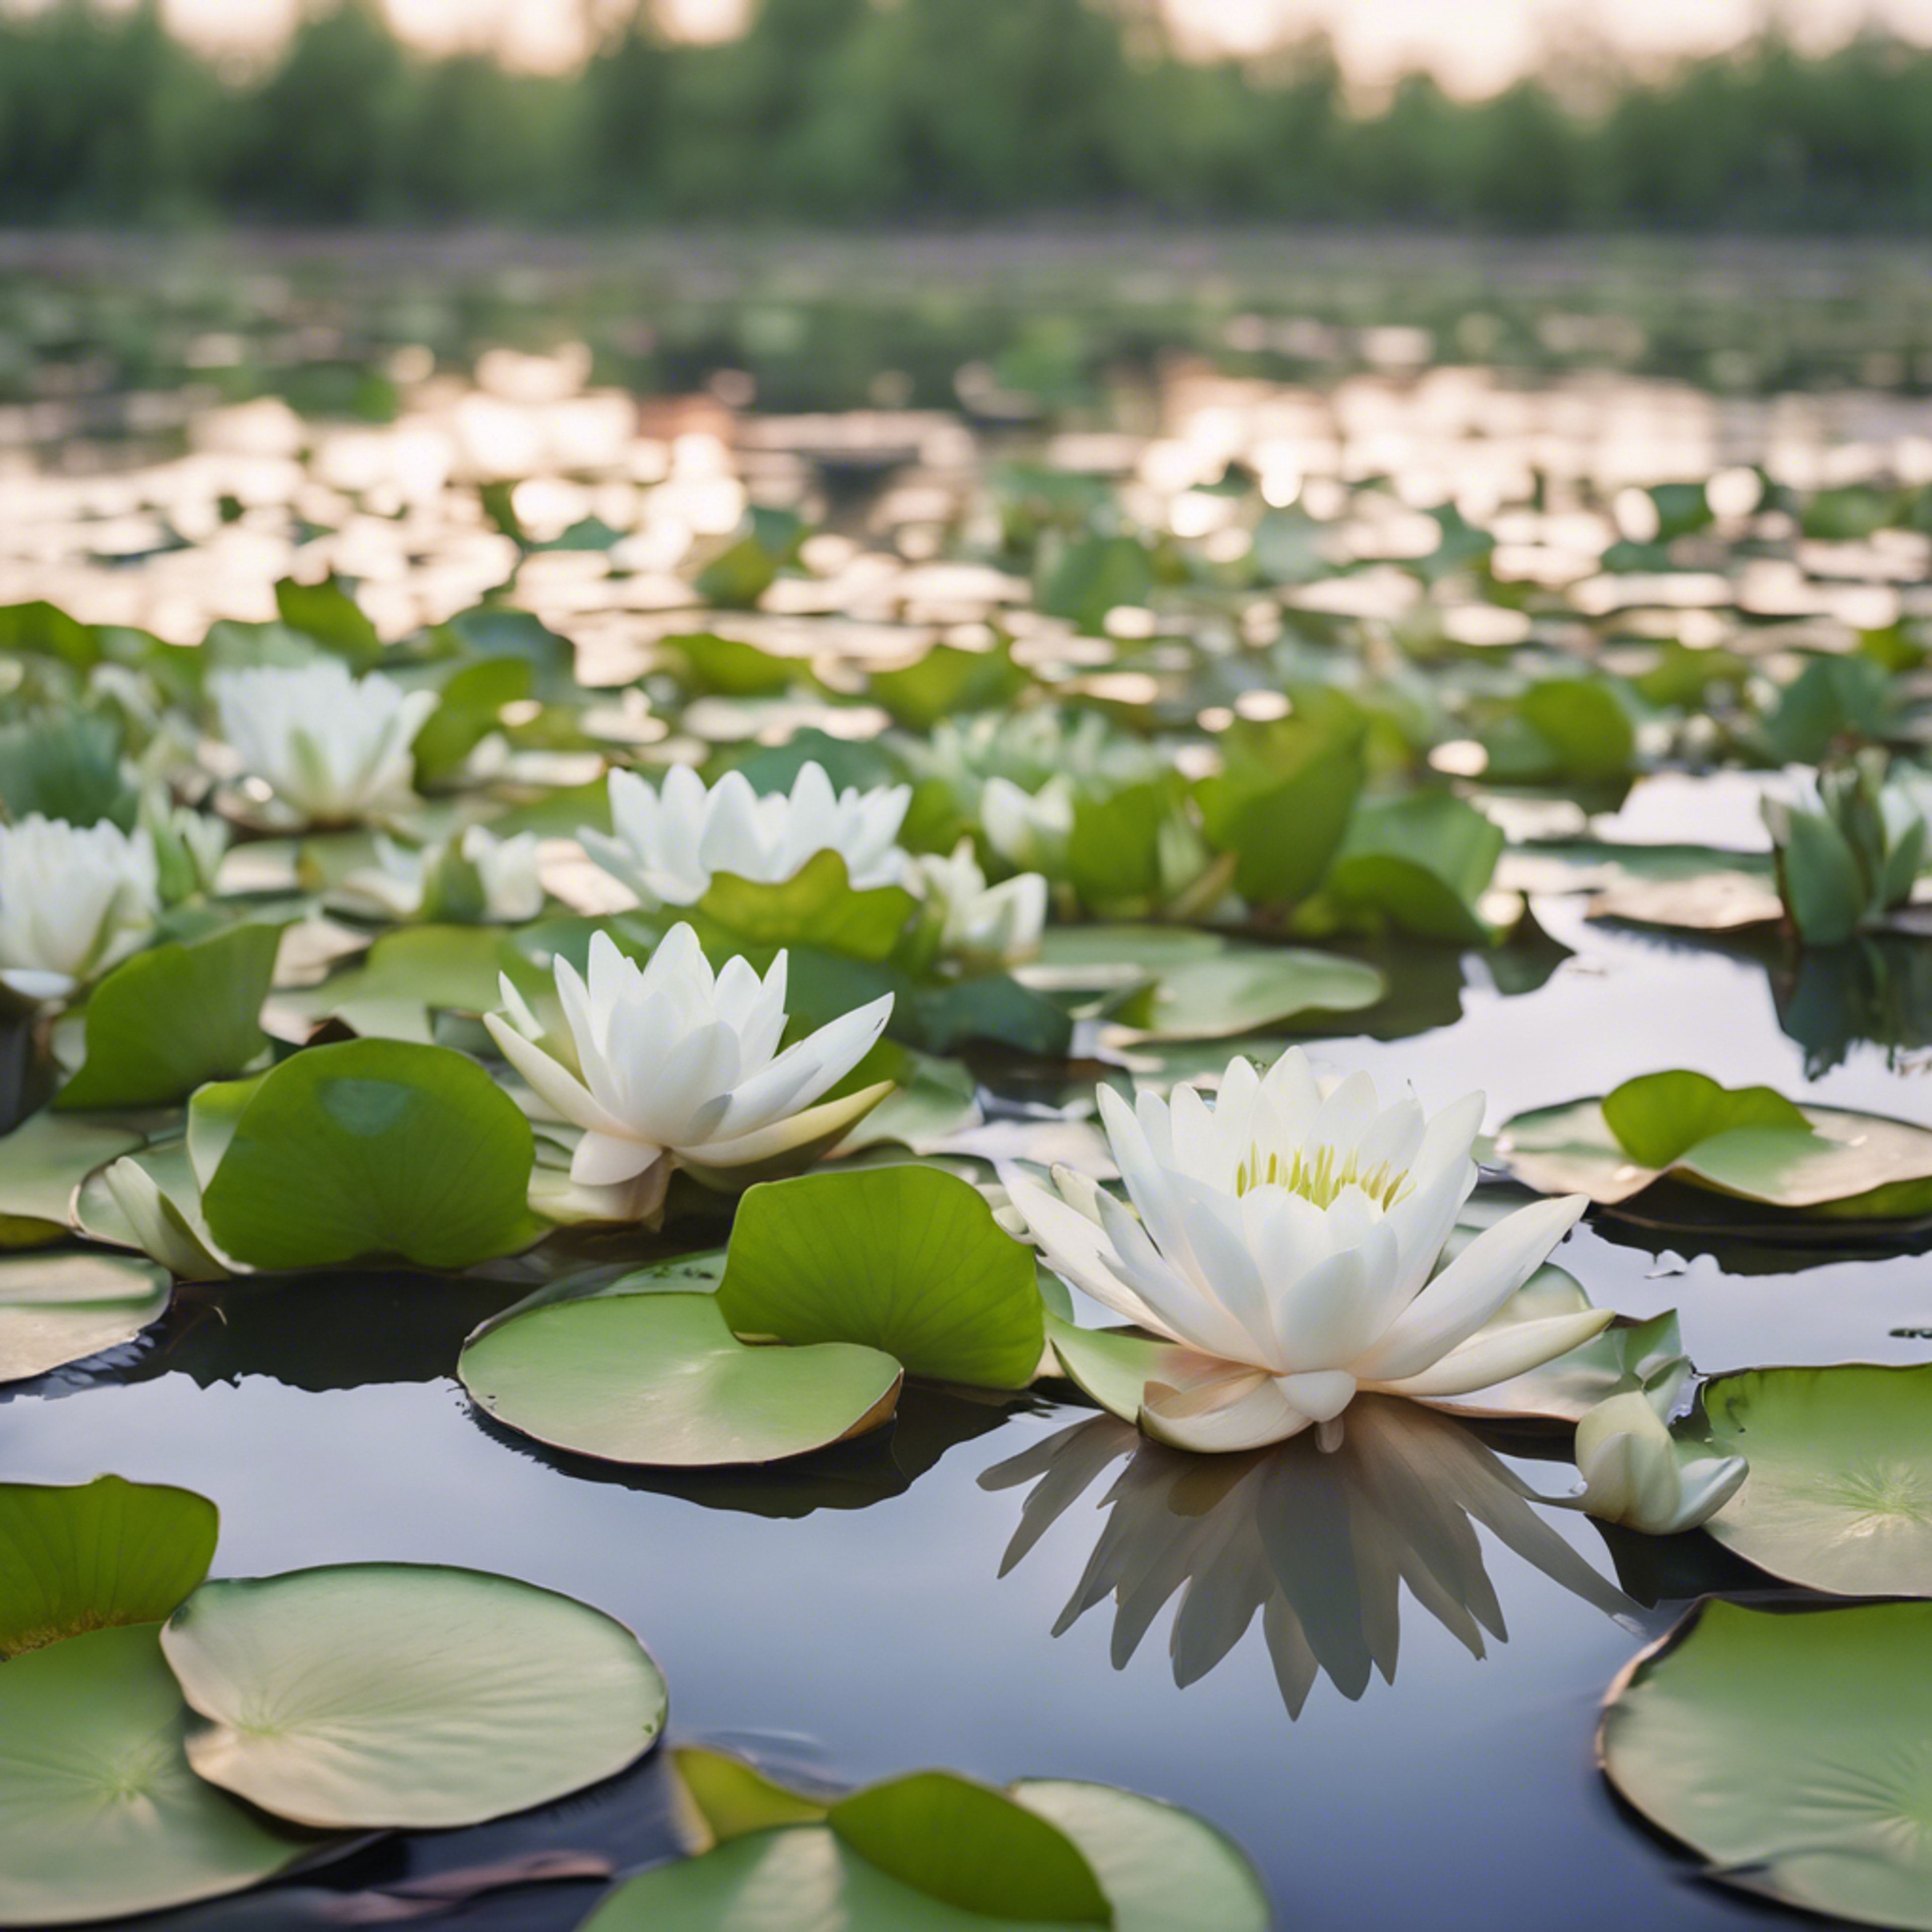 A tranquil lily pond with light green lily pads and budding flowers. Tapeta[e3bf8ad191934de7ab8c]